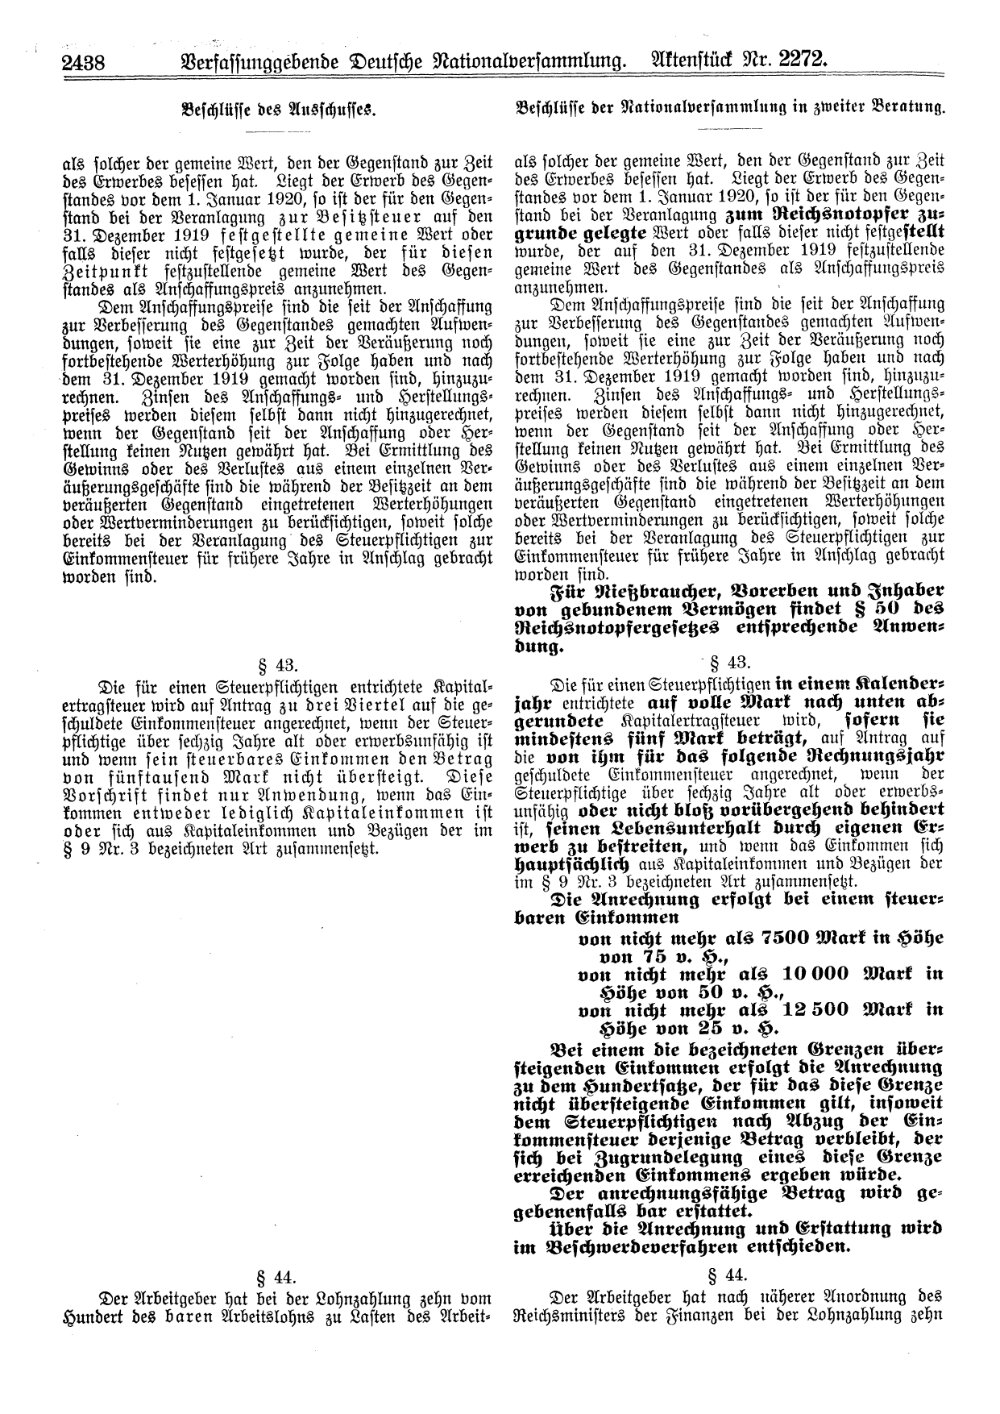 Scan of page 2438